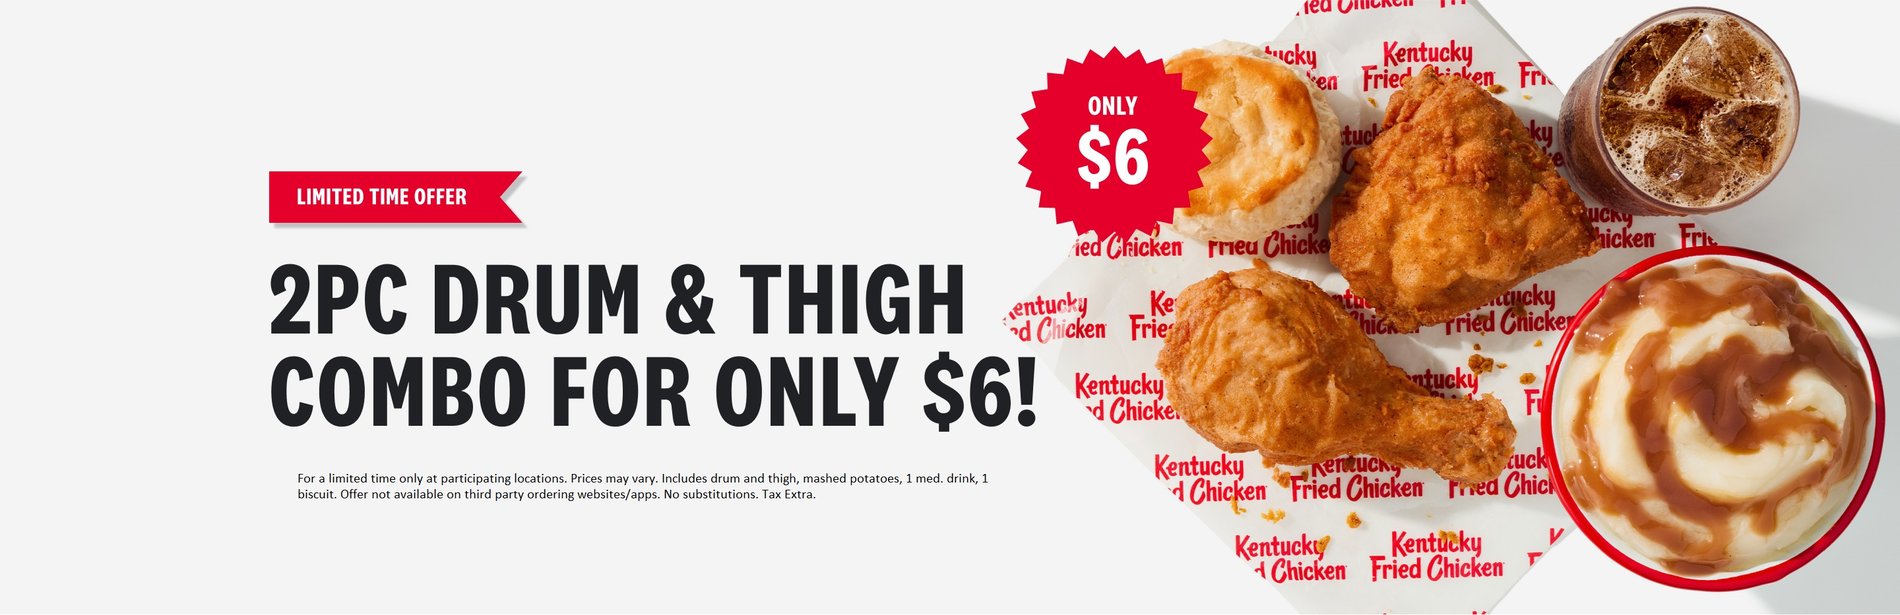 2 pc drum & thigh combo for only $6